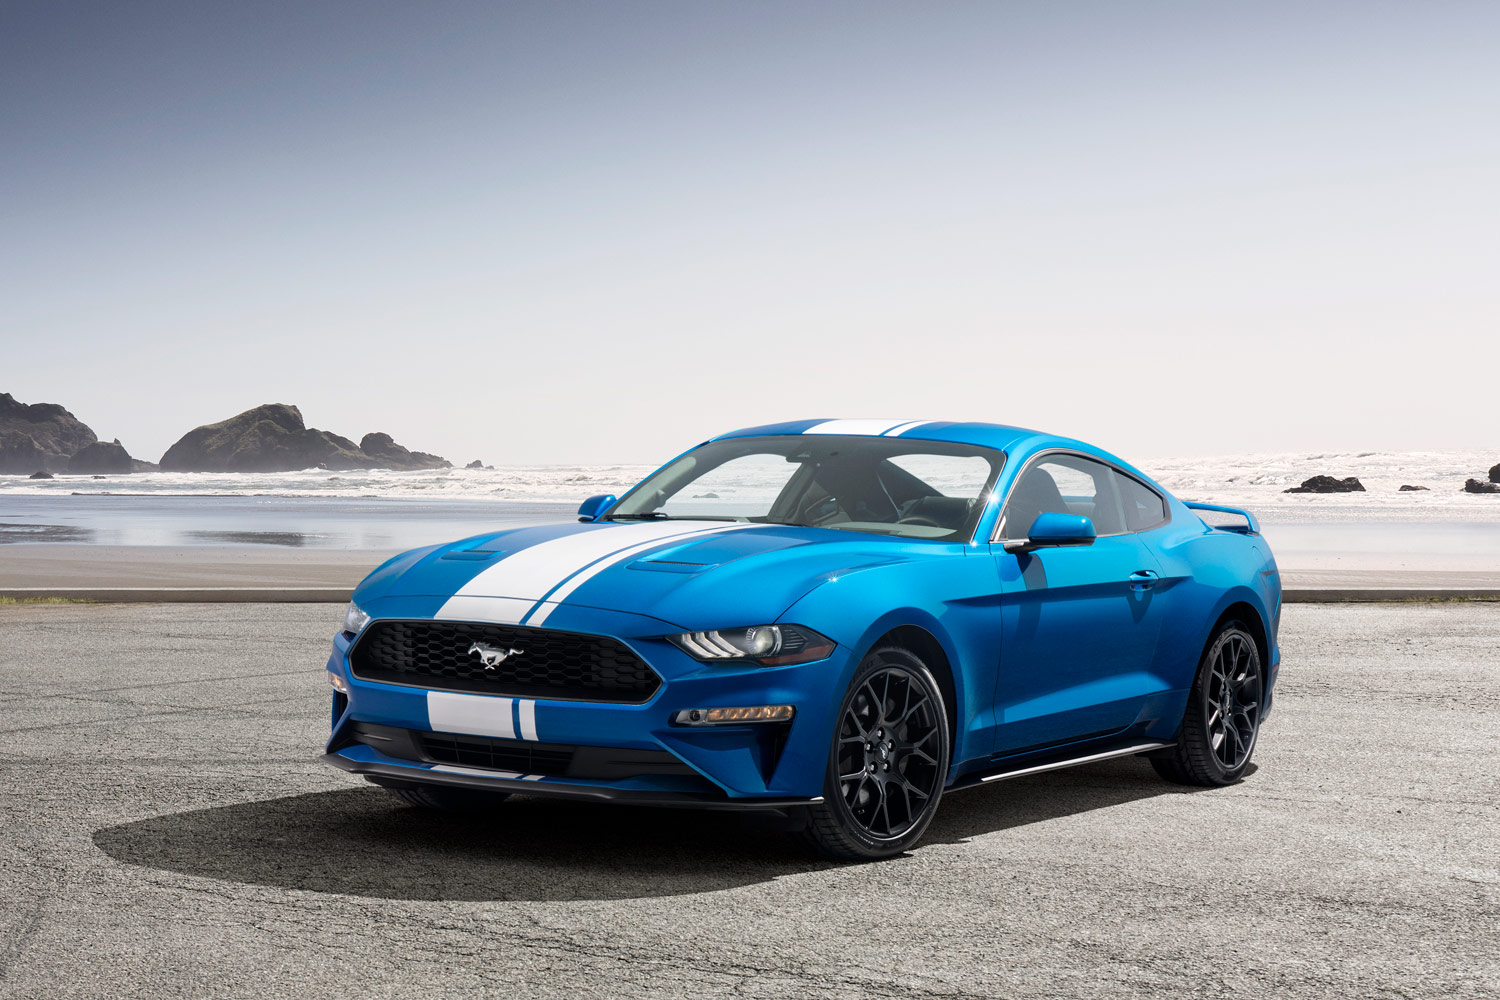 A blue Ford Mustang with white racing stripes